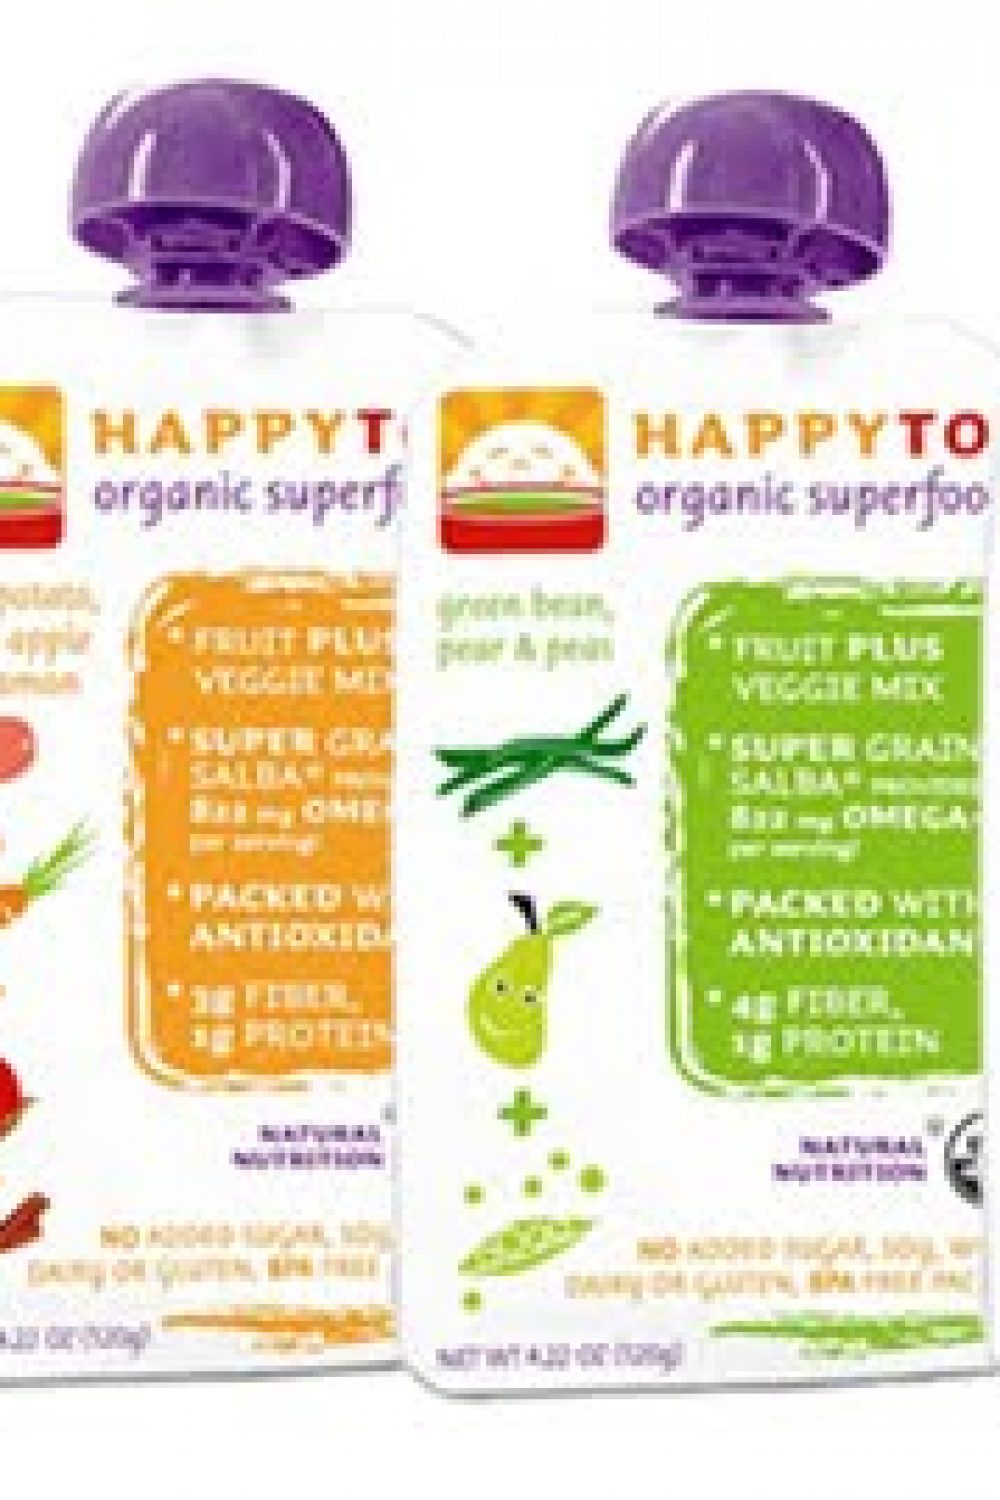 Whiny Wednesday: HappyBaby Organics Makes for a Happy Baby